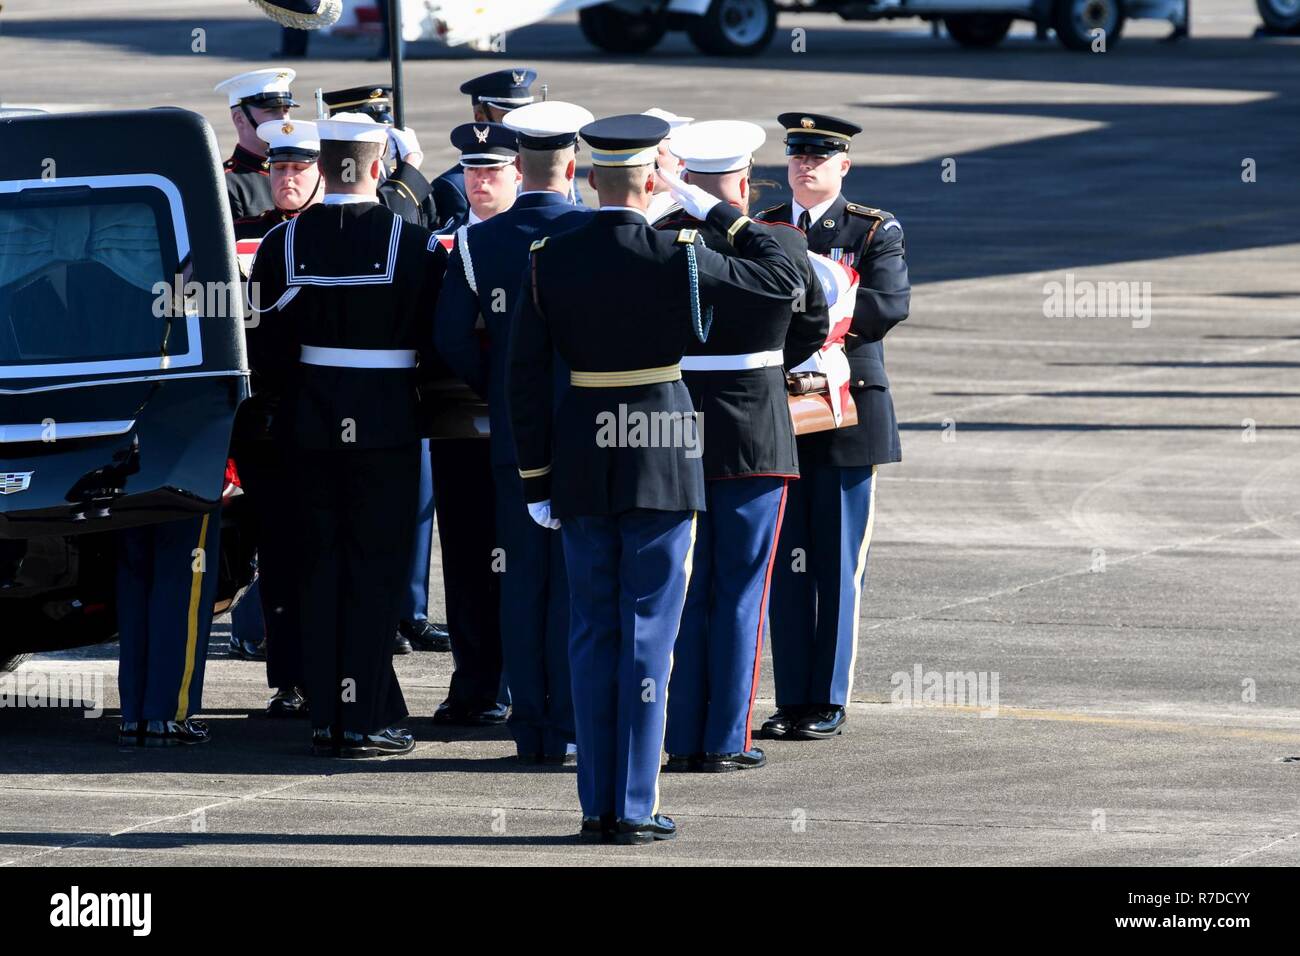 U.S. service members of the joint forces honor guard provide military honors during the departure of former President George H. W. Bush, the 41st President of the United States, from Ellington Field Joint Reserve Base, Texas Dec. 03, 2018. Nearly 4,000 military and civilian personnel from across all branches of the U.S. armed forces, including Reserve and National Guard components, provided ceremonial support during George H. W. Bush’s, the 41st President of the United States state funeral. (Air National Guard Stock Photo